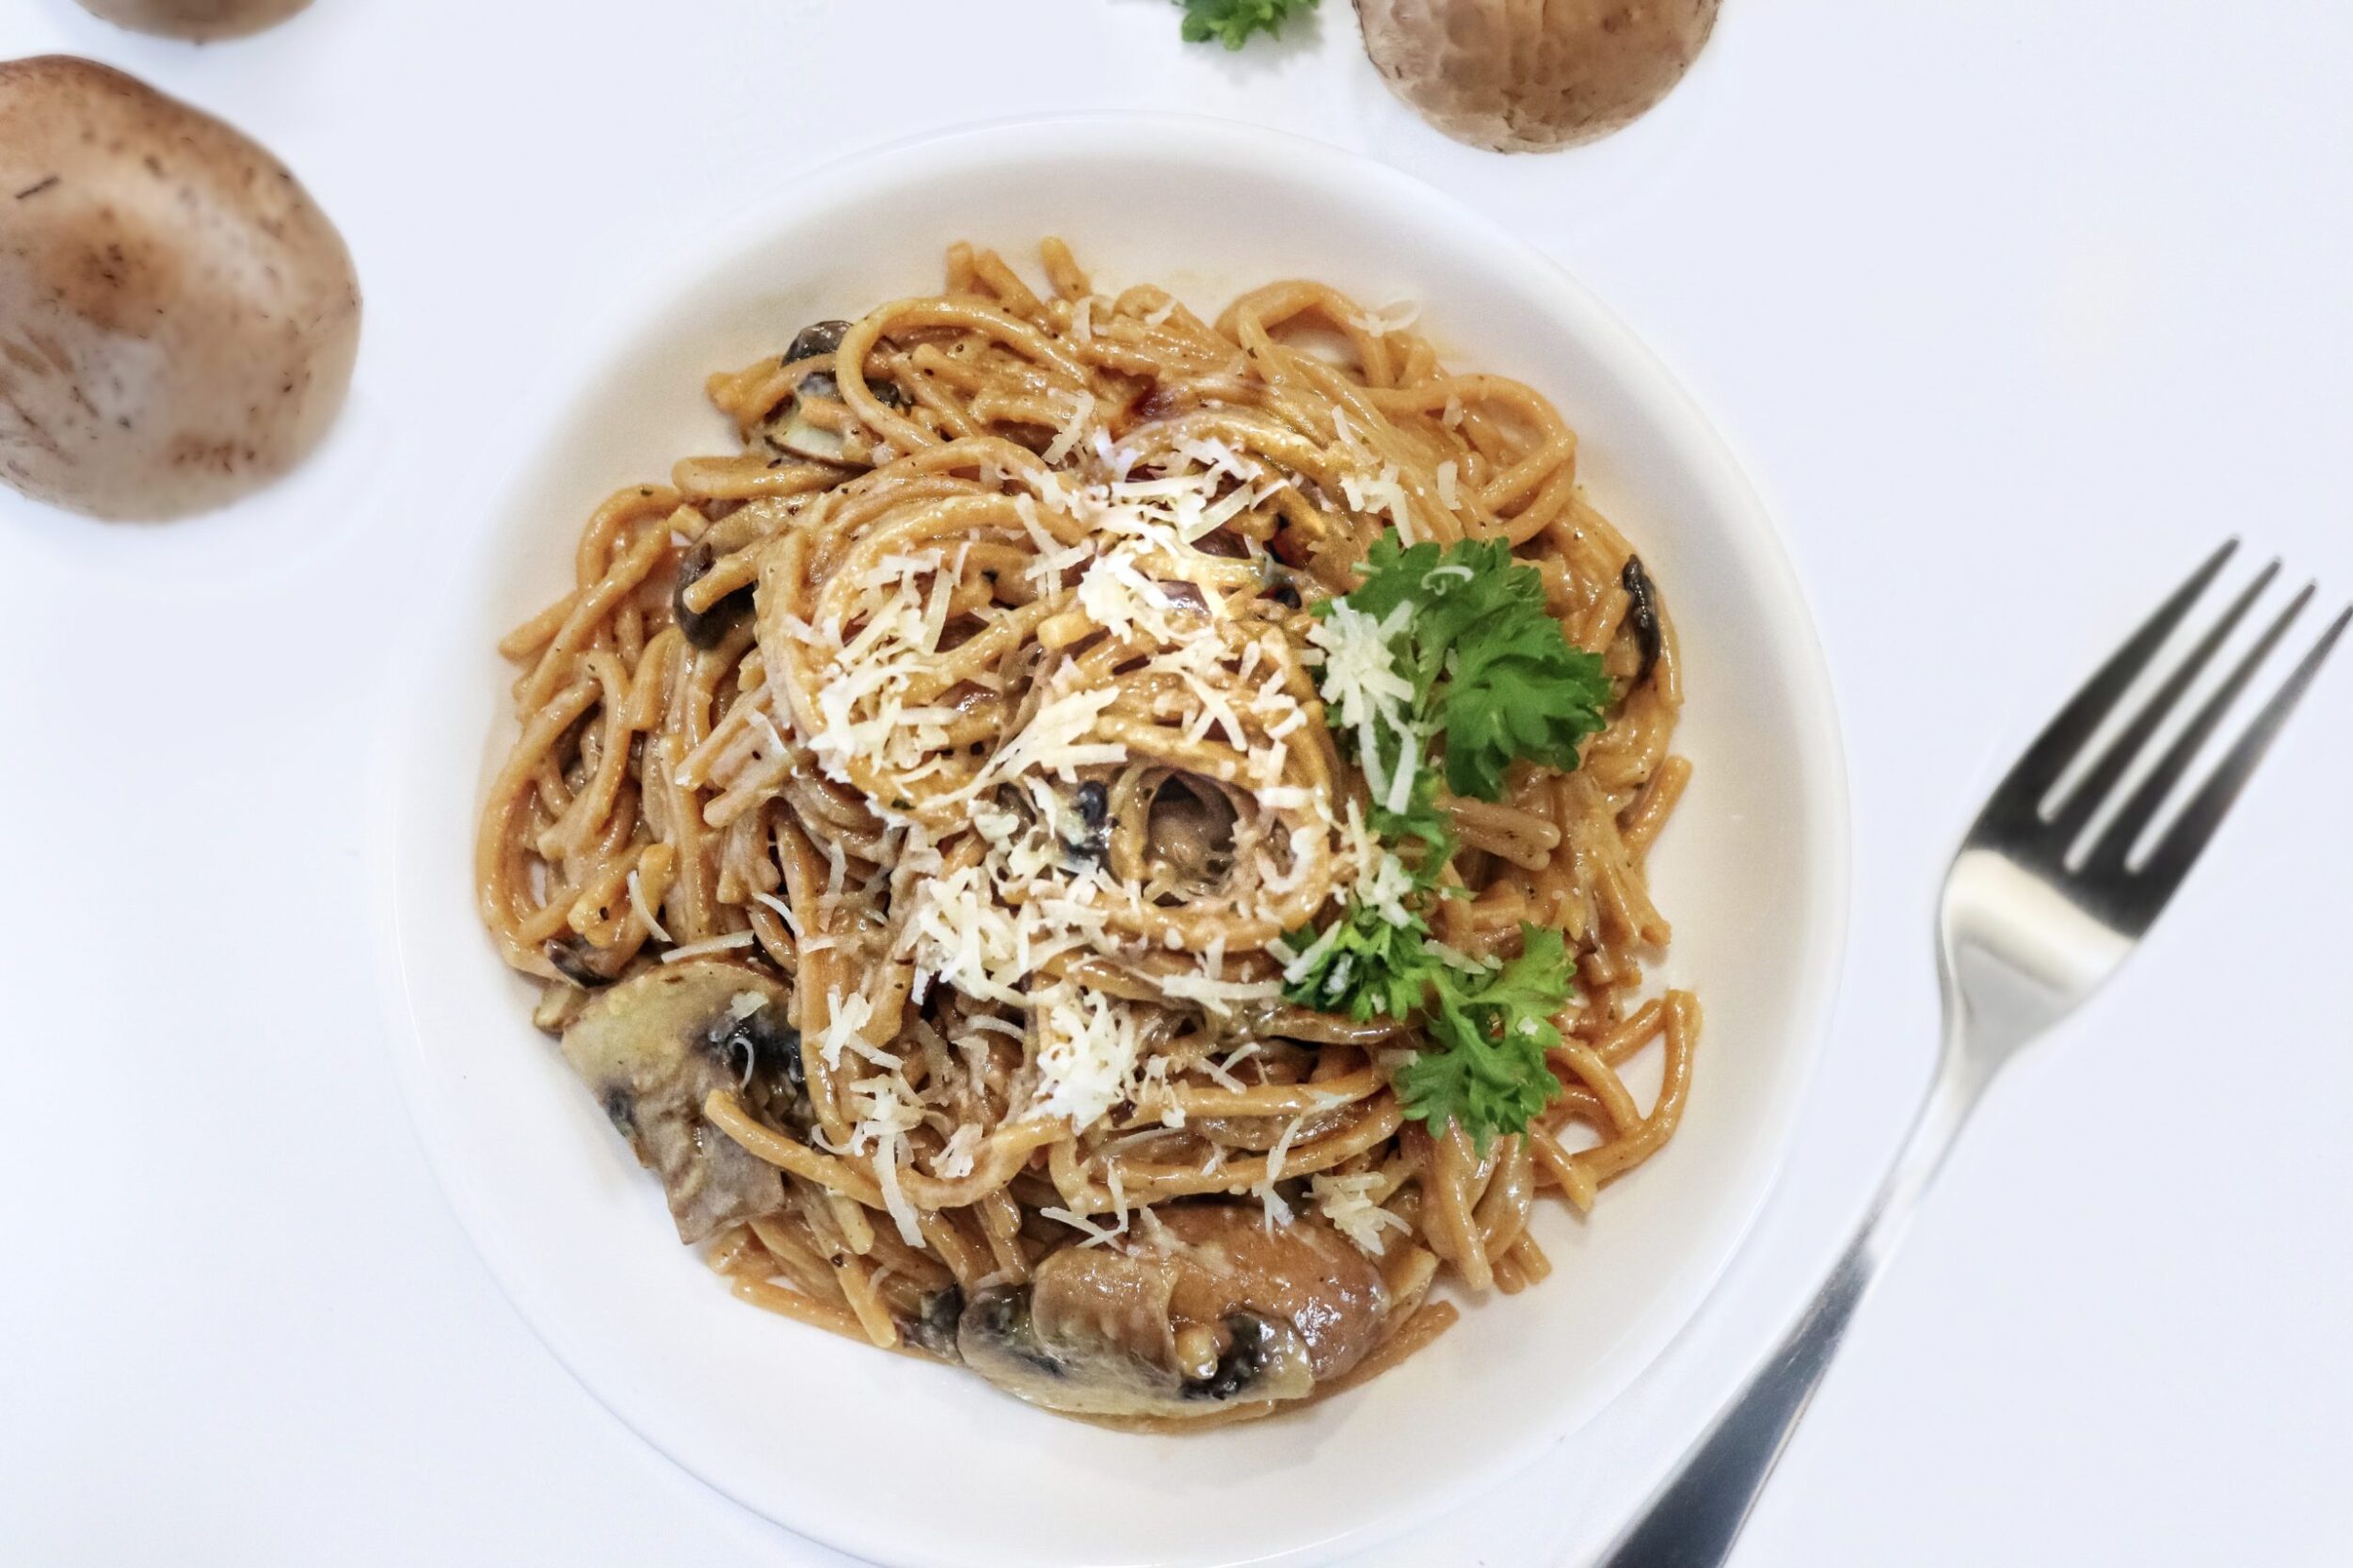 Creamy mushroom pasta with bouillon cube and milk or heavy cream easy weeknight meal